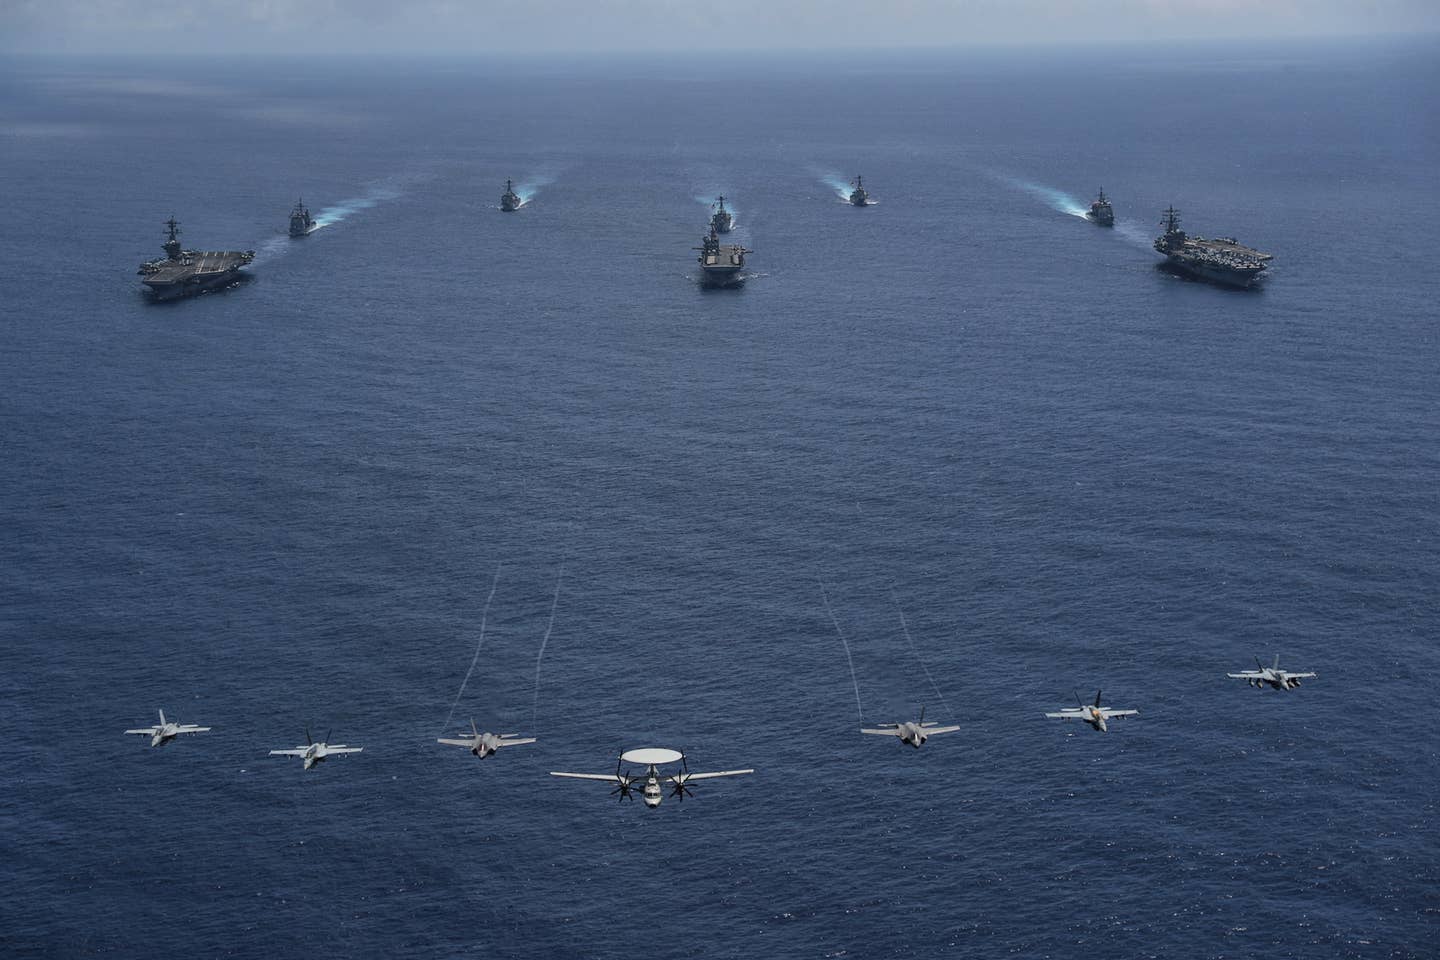 Aircraft from Carrier Air Wing Nine fly over the aircraft carrier <em>Abraham Lincoln</em> (CVN-72), front left, amphibious assault ship USS <em>Tripoli</em> (LHA-7), front center, aircraft carrier USS <em>Ronald Reagan</em> (CVN-76), front right, the cruiser USS <em>Mobile Bay</em> (CG-53), middle left, destroyer USS <em>Benfold</em> (DDG-65), middle center, cruiser USS <em>Antietam</em> (CG 54), middle right, destroyer USS <em>Spruance</em> (DDG-111), back left, and destroyer USS <em>Fitzgerald</em> (DDG-62), back right, as they sail in formation during Valiant Shield 2022. <em>U.S. Navy photo by Mass Communication Specialist 3rd Class Thaddeus Berry</em>